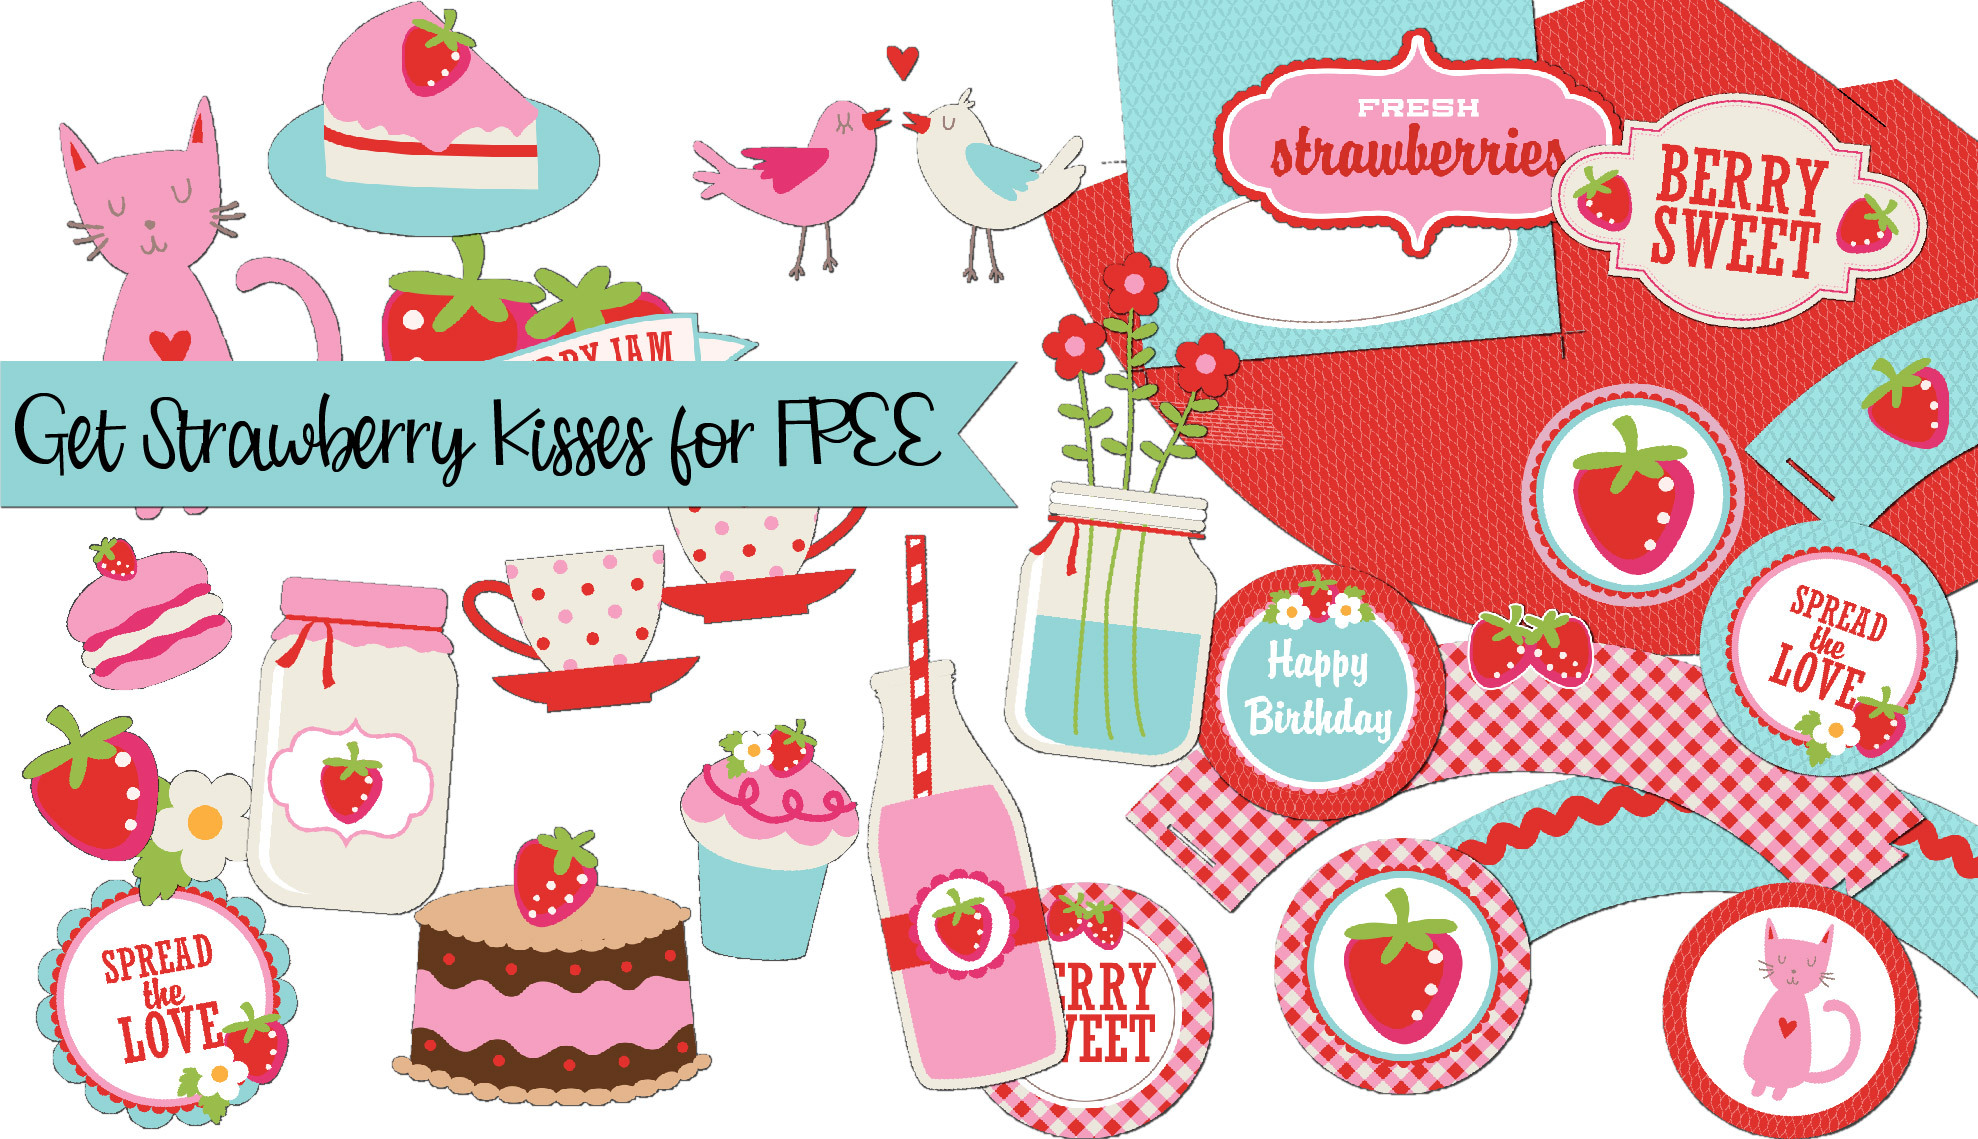 Earn the Strawberry Kisses - Promotional Bundle - Free